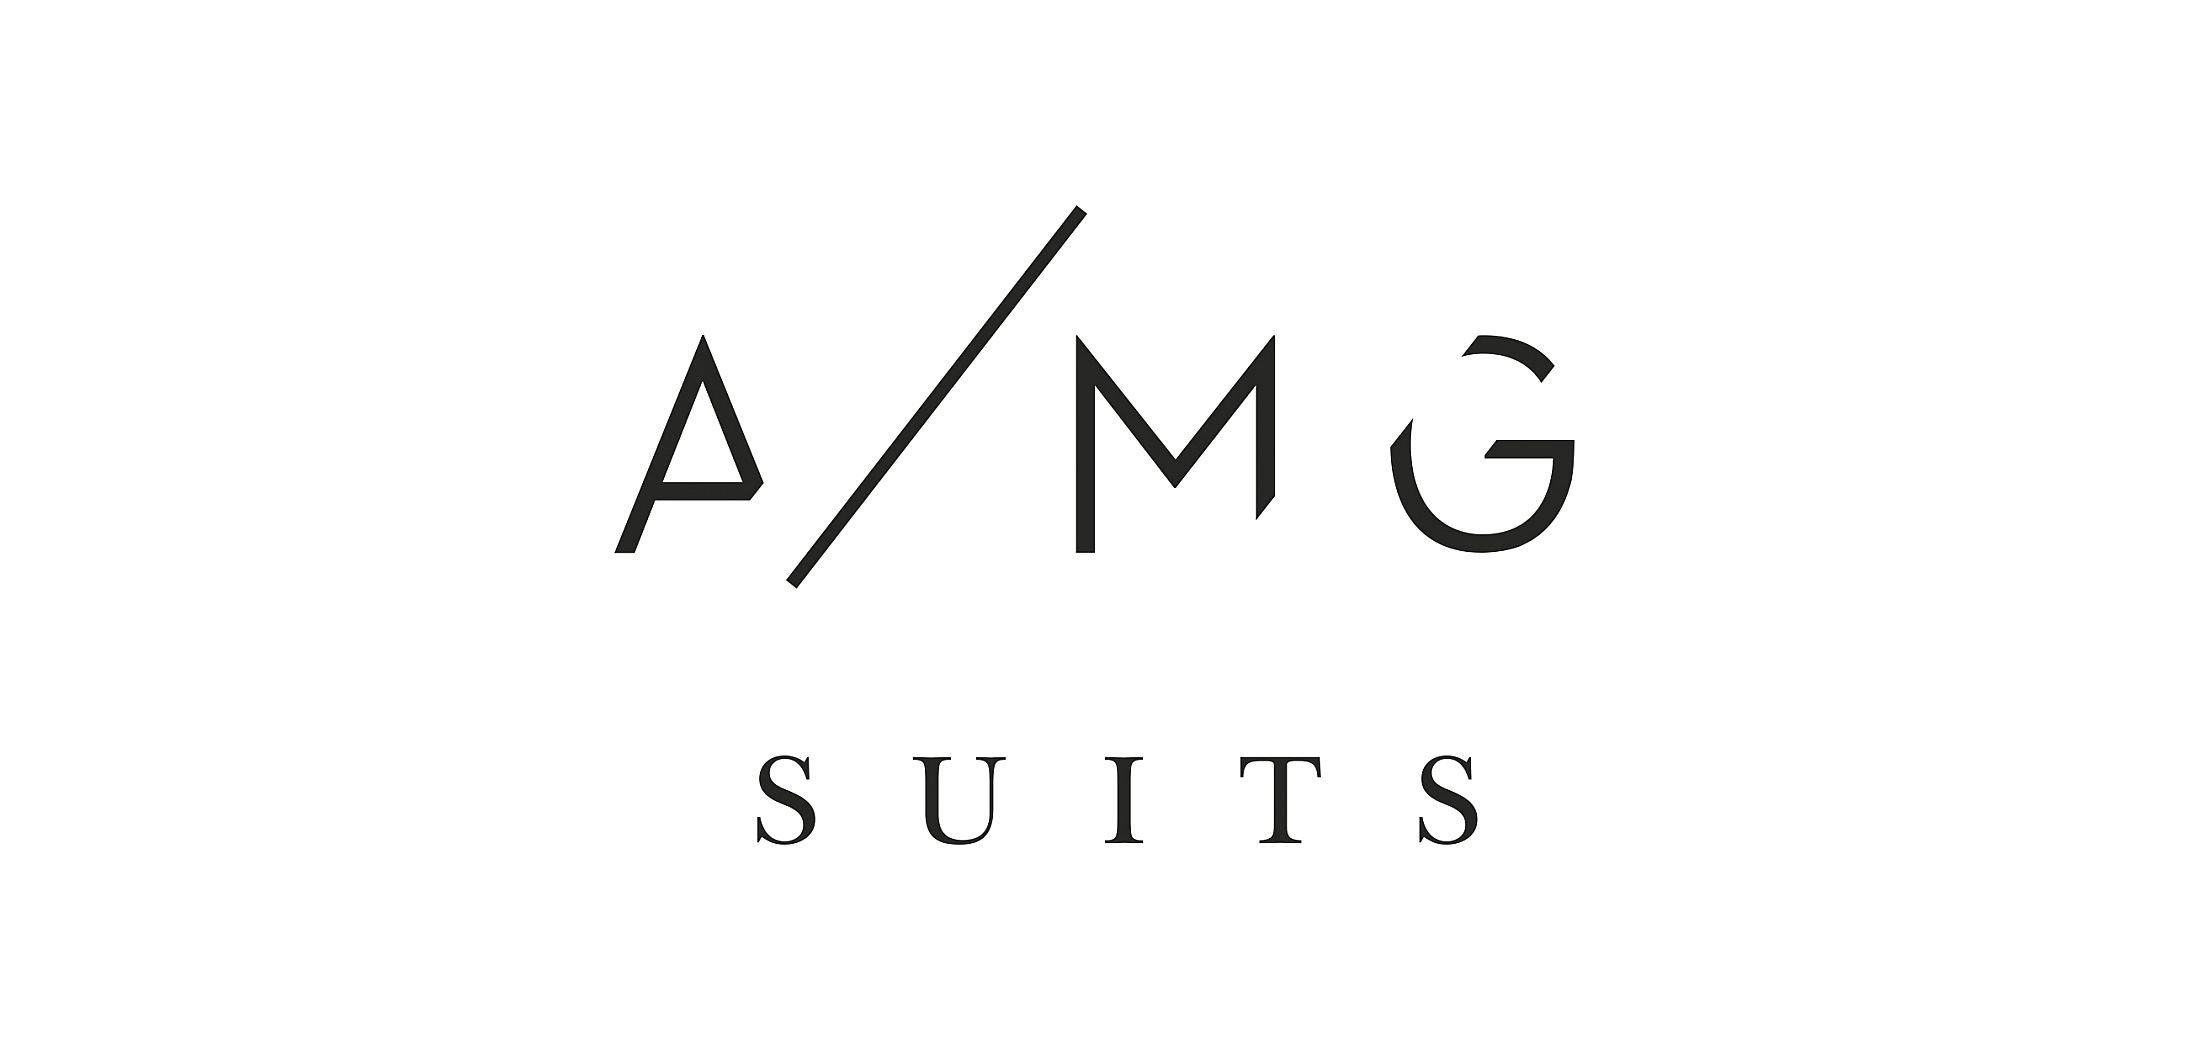 AMG suits